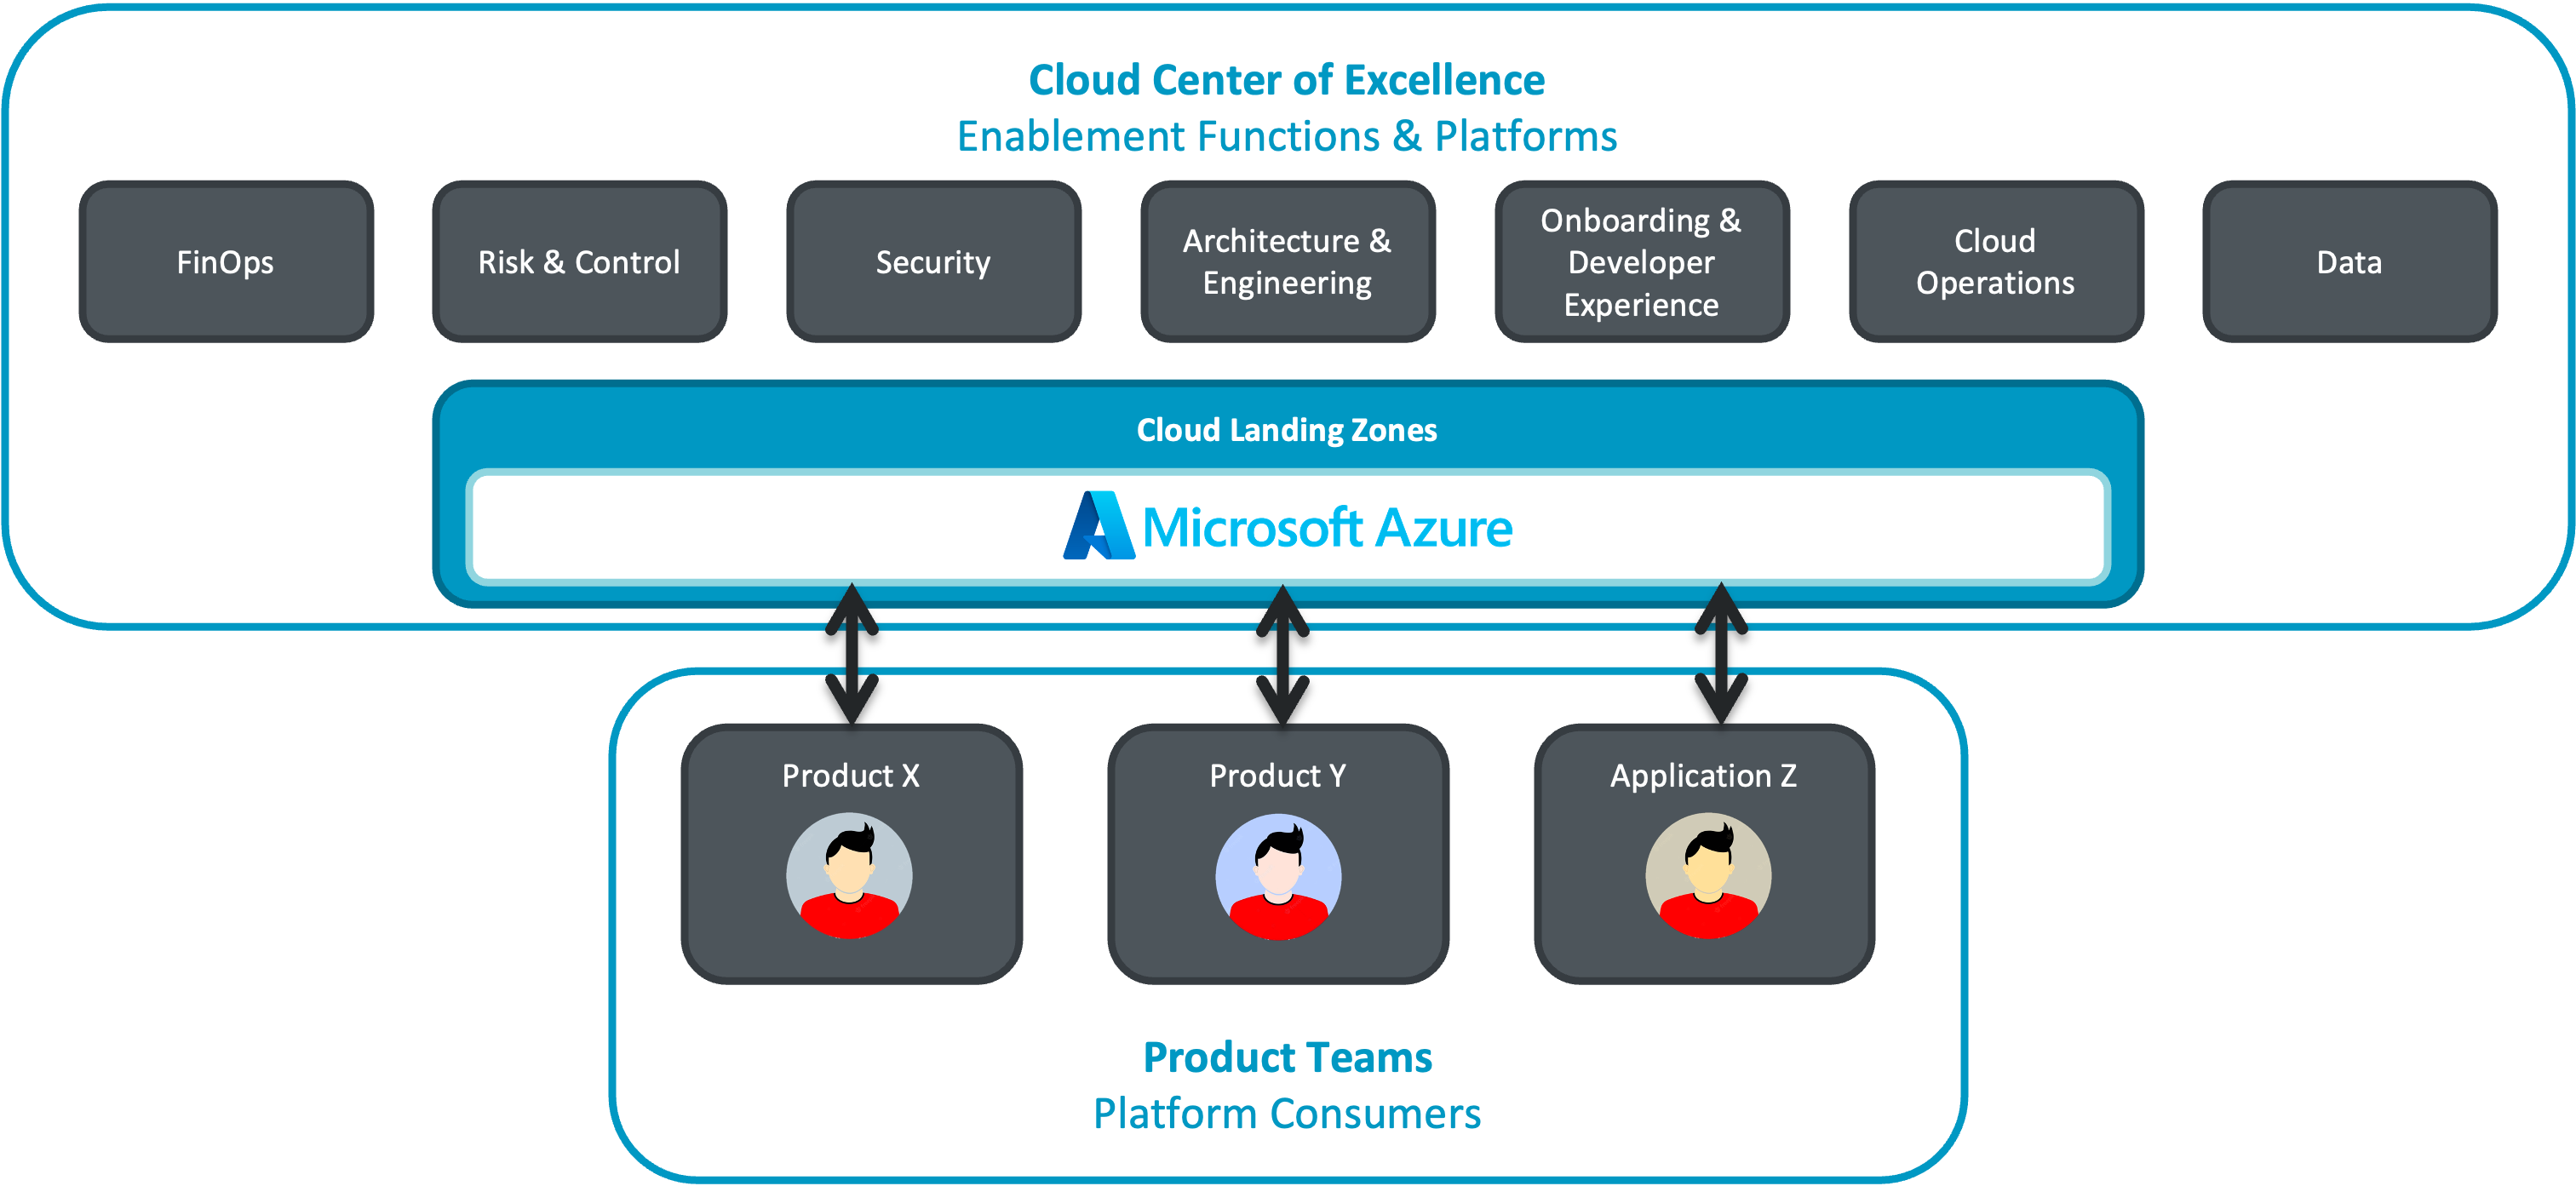 Cloud Center of Excellence